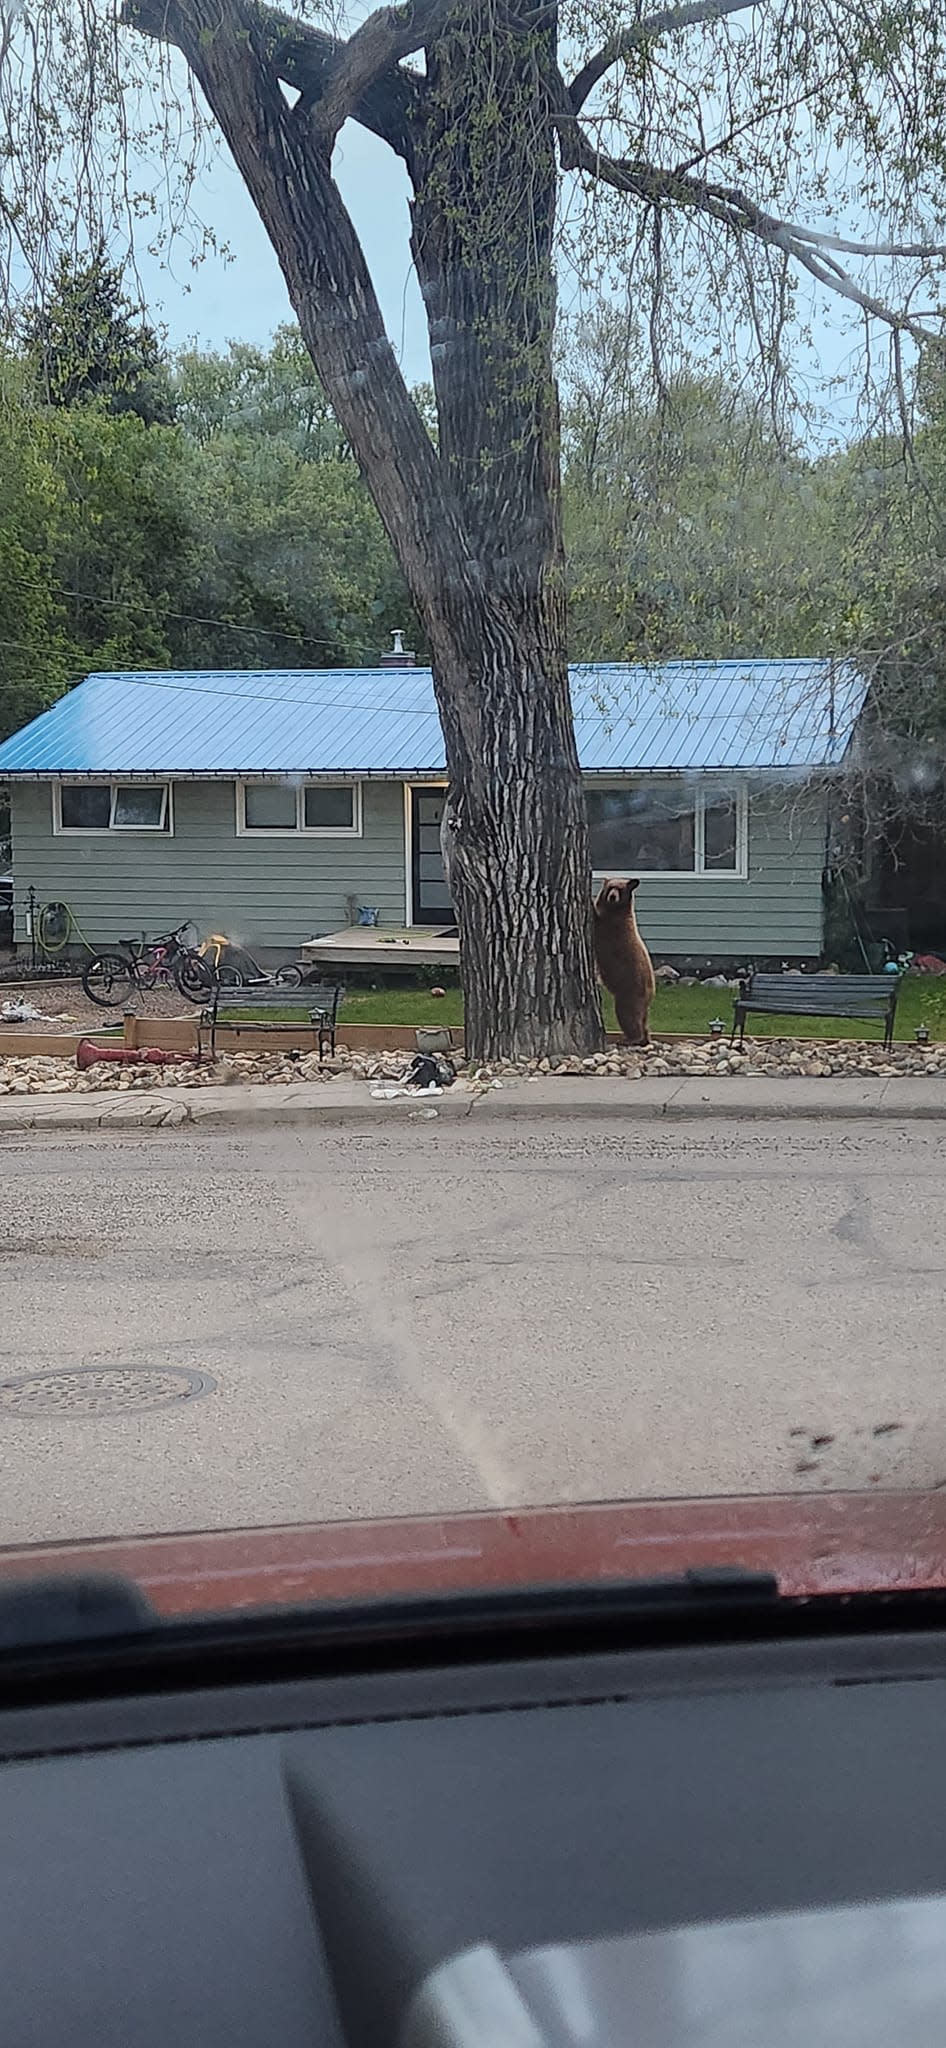 A bear made its way into the town of Lumsden, northwest of Regina, on Thursday. It was killed later that day by RCMP after attempts to capture it were unsuccessful. (Curtis Koskie/Facebook - image credit)